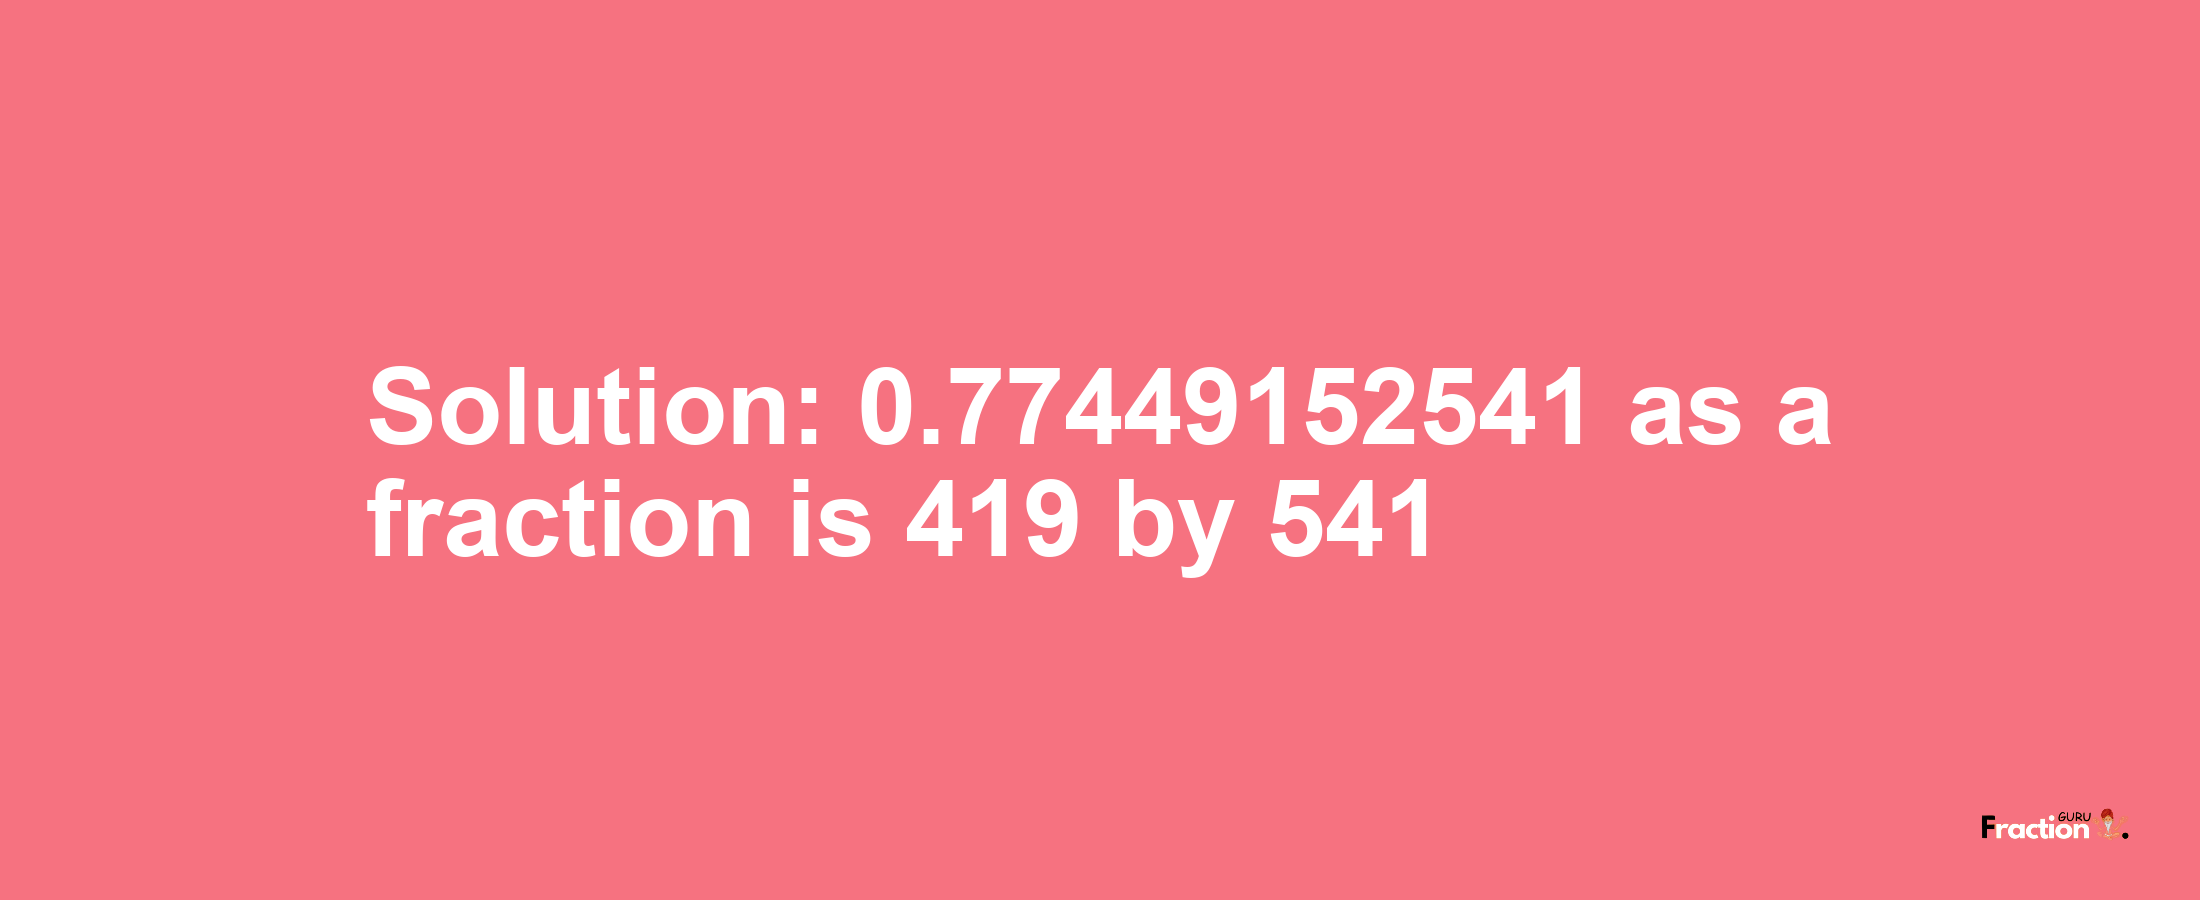 Solution:0.77449152541 as a fraction is 419/541